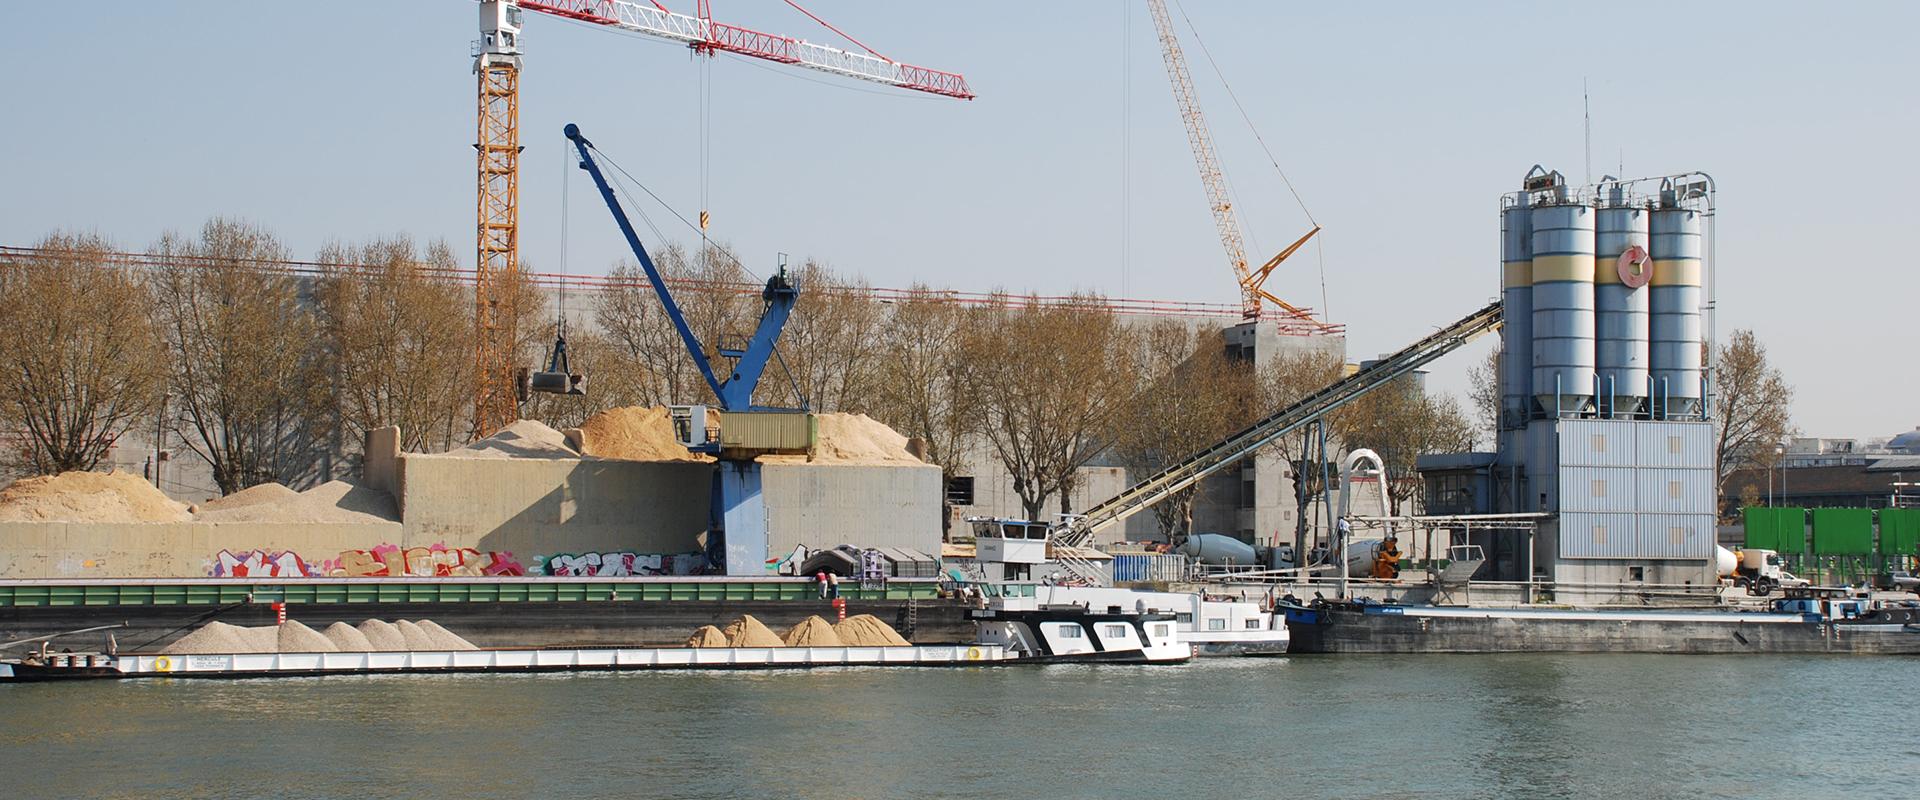 Delivery and unloading of sand by barge, Île-de-France